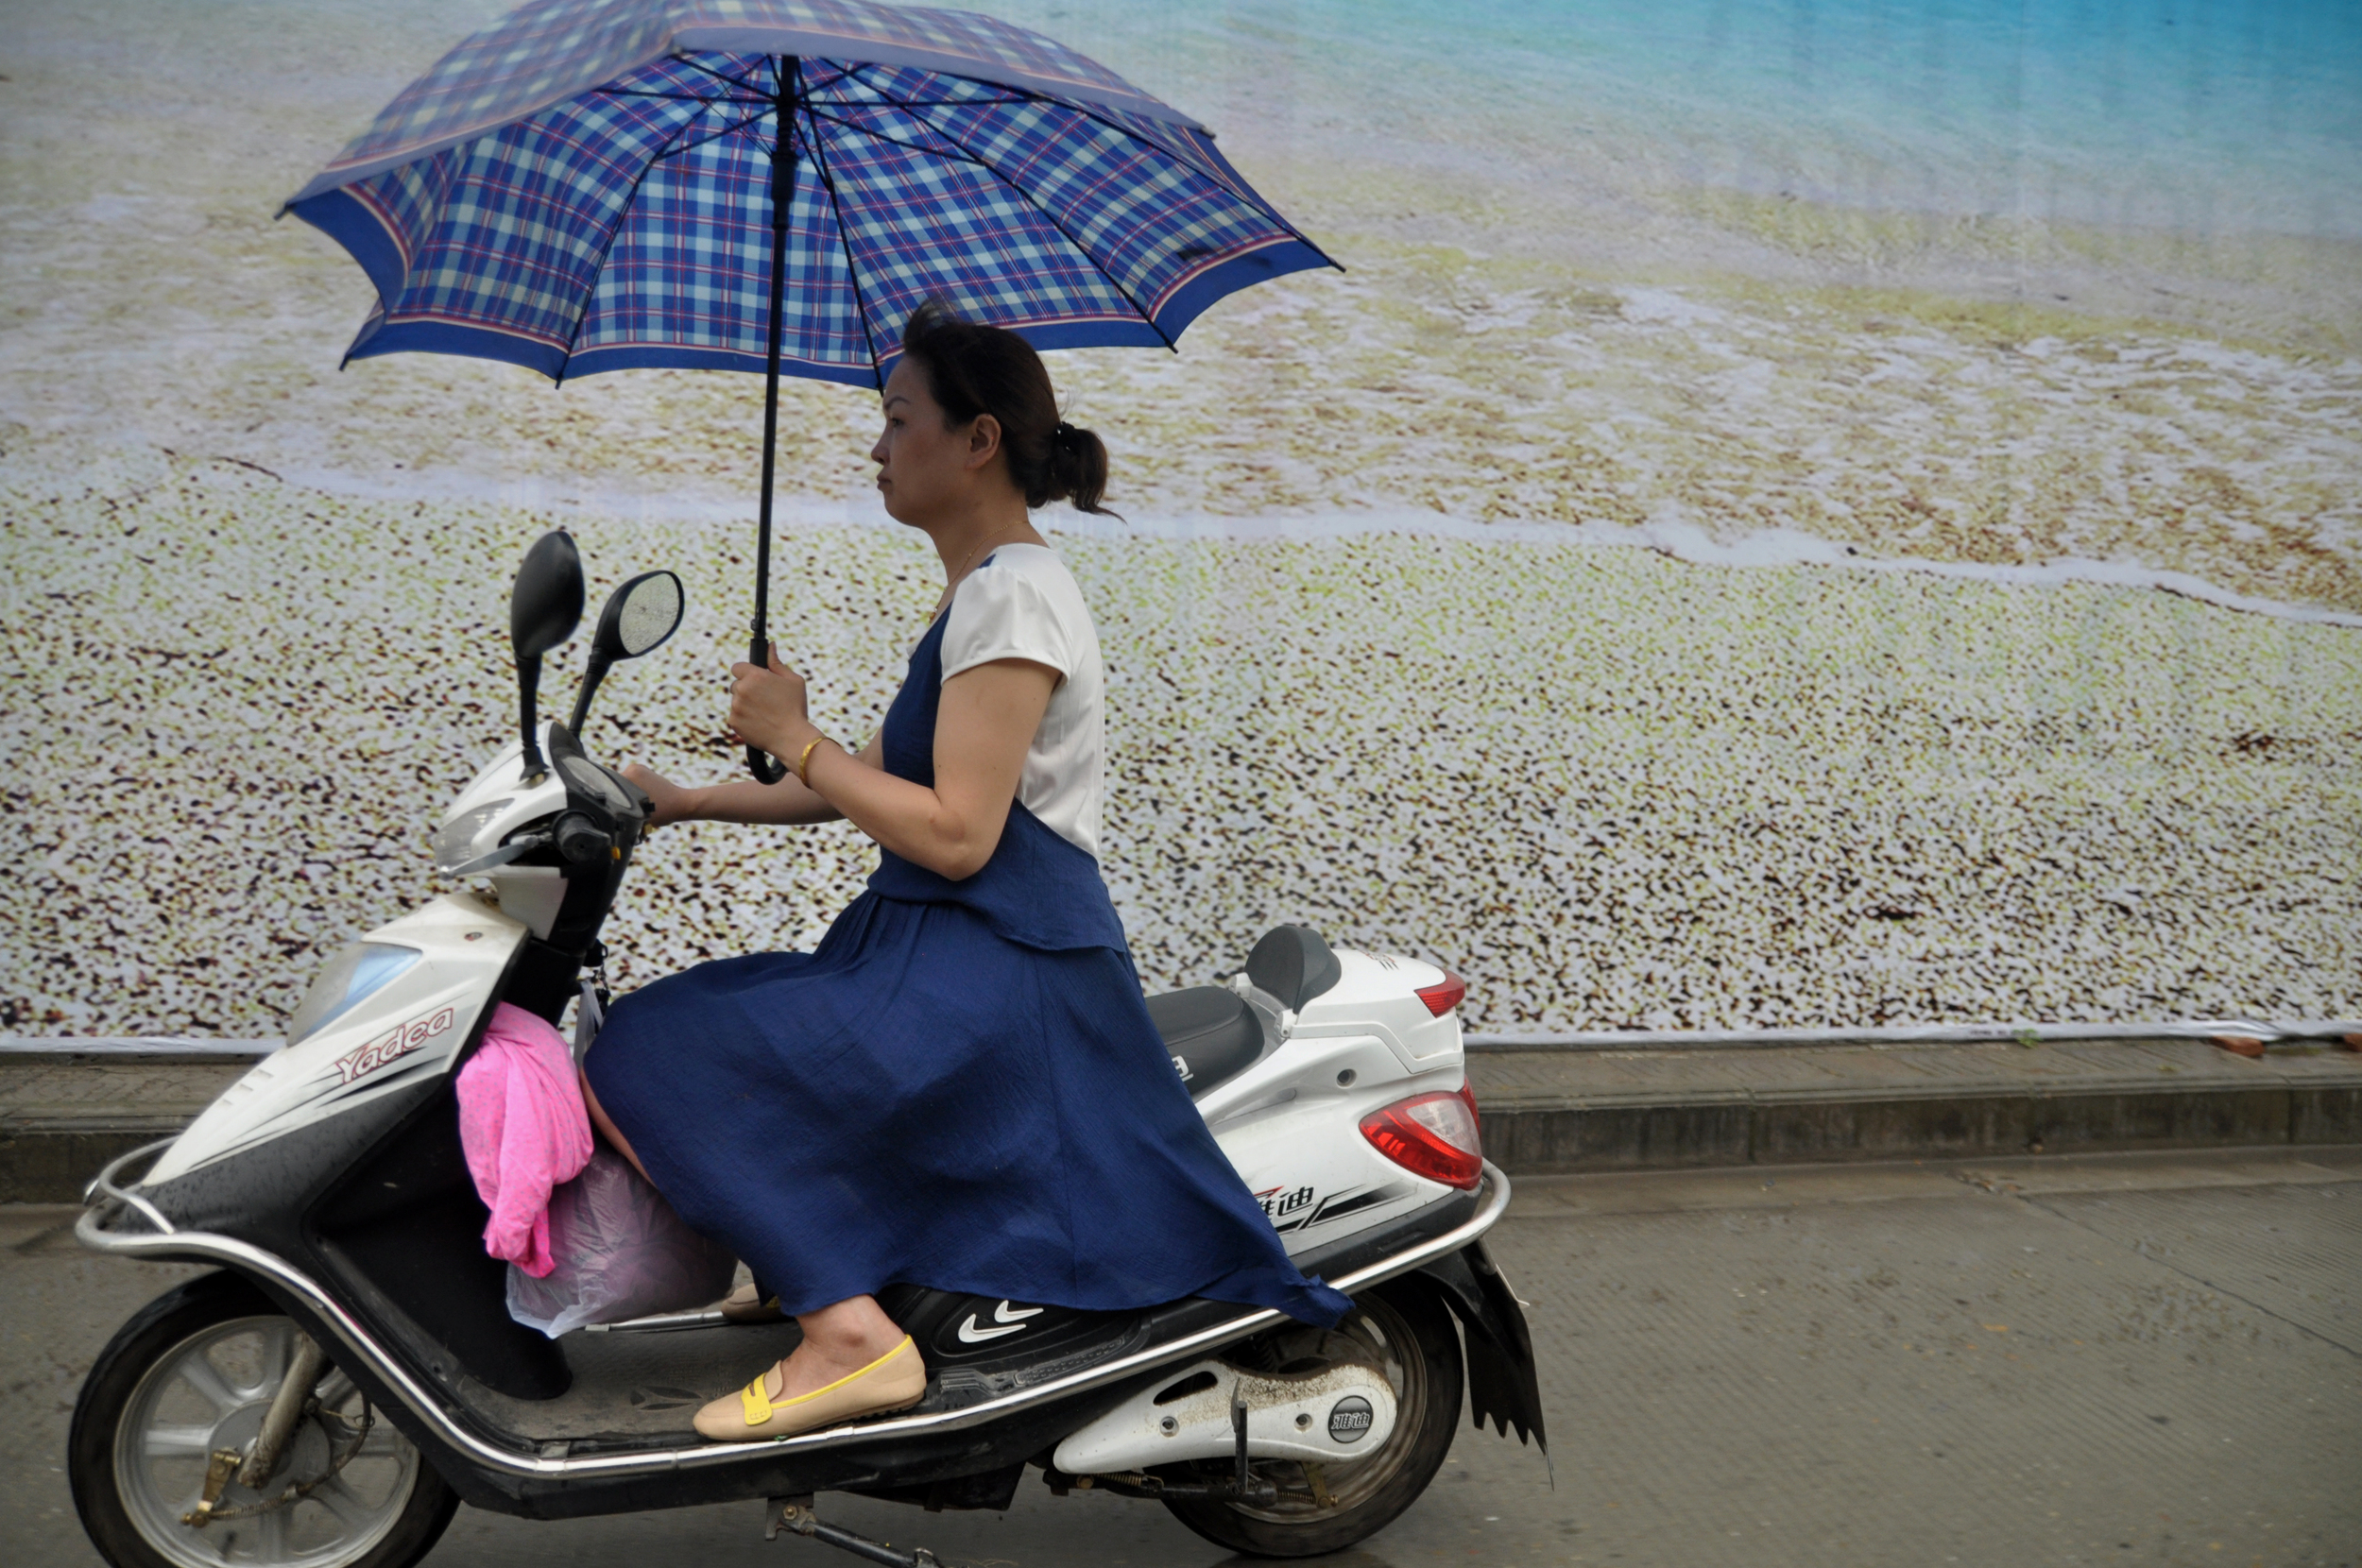 WOMAN ON SCOOTER.jpg